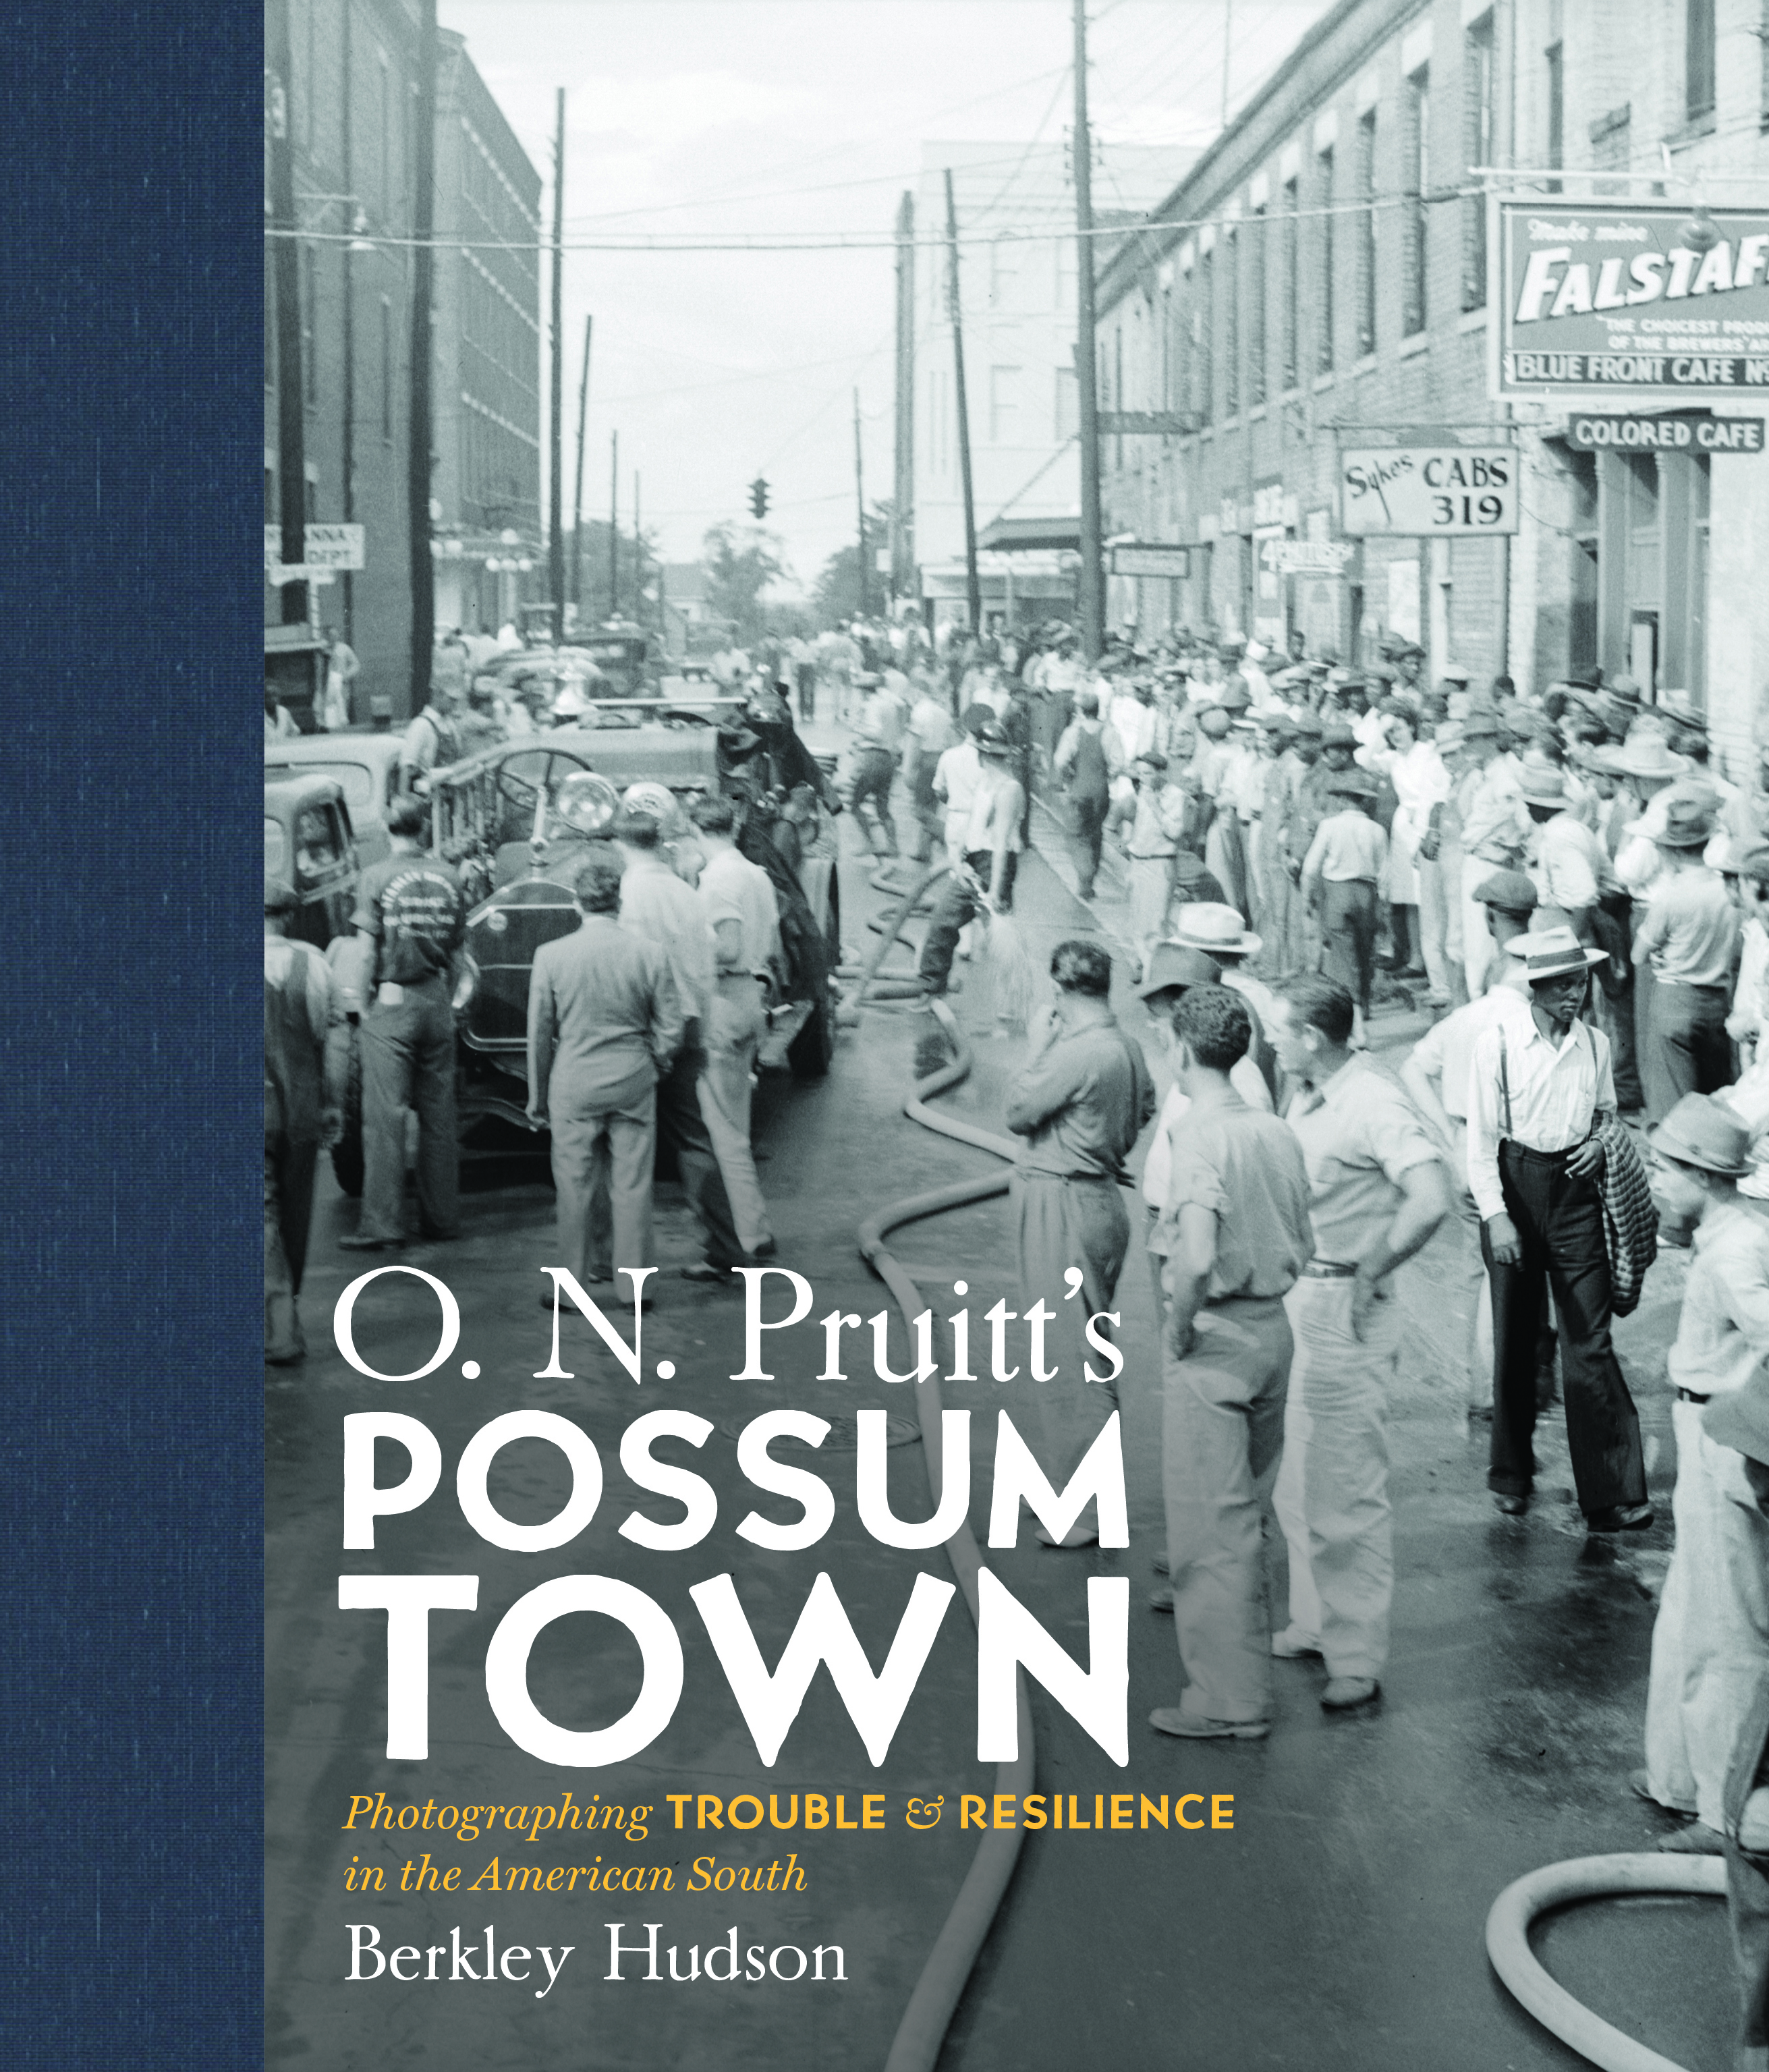 Book Cover: Possom Town